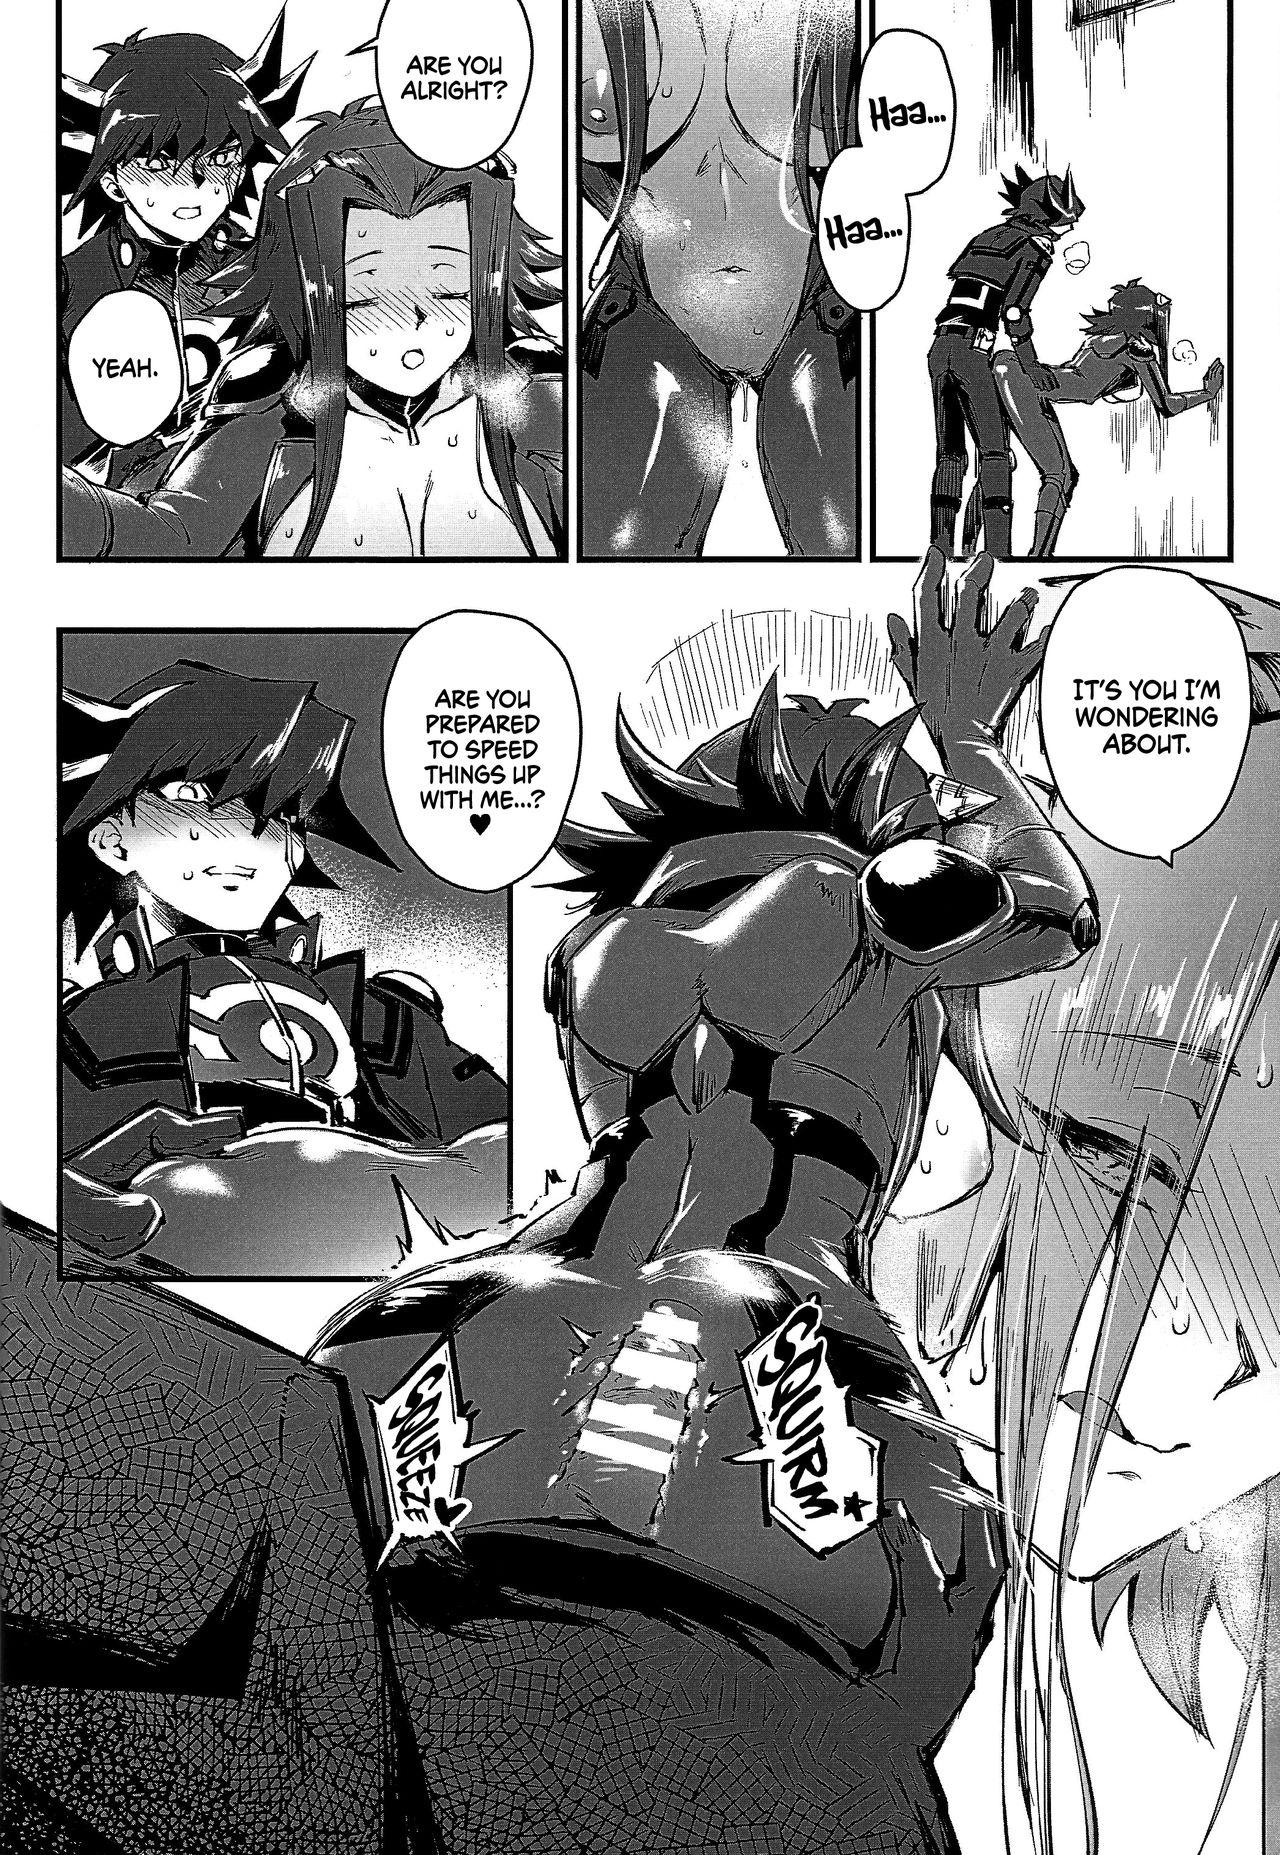 Oralsex MASK of D. - Yu-gi-oh 5ds Oldvsyoung - Page 9